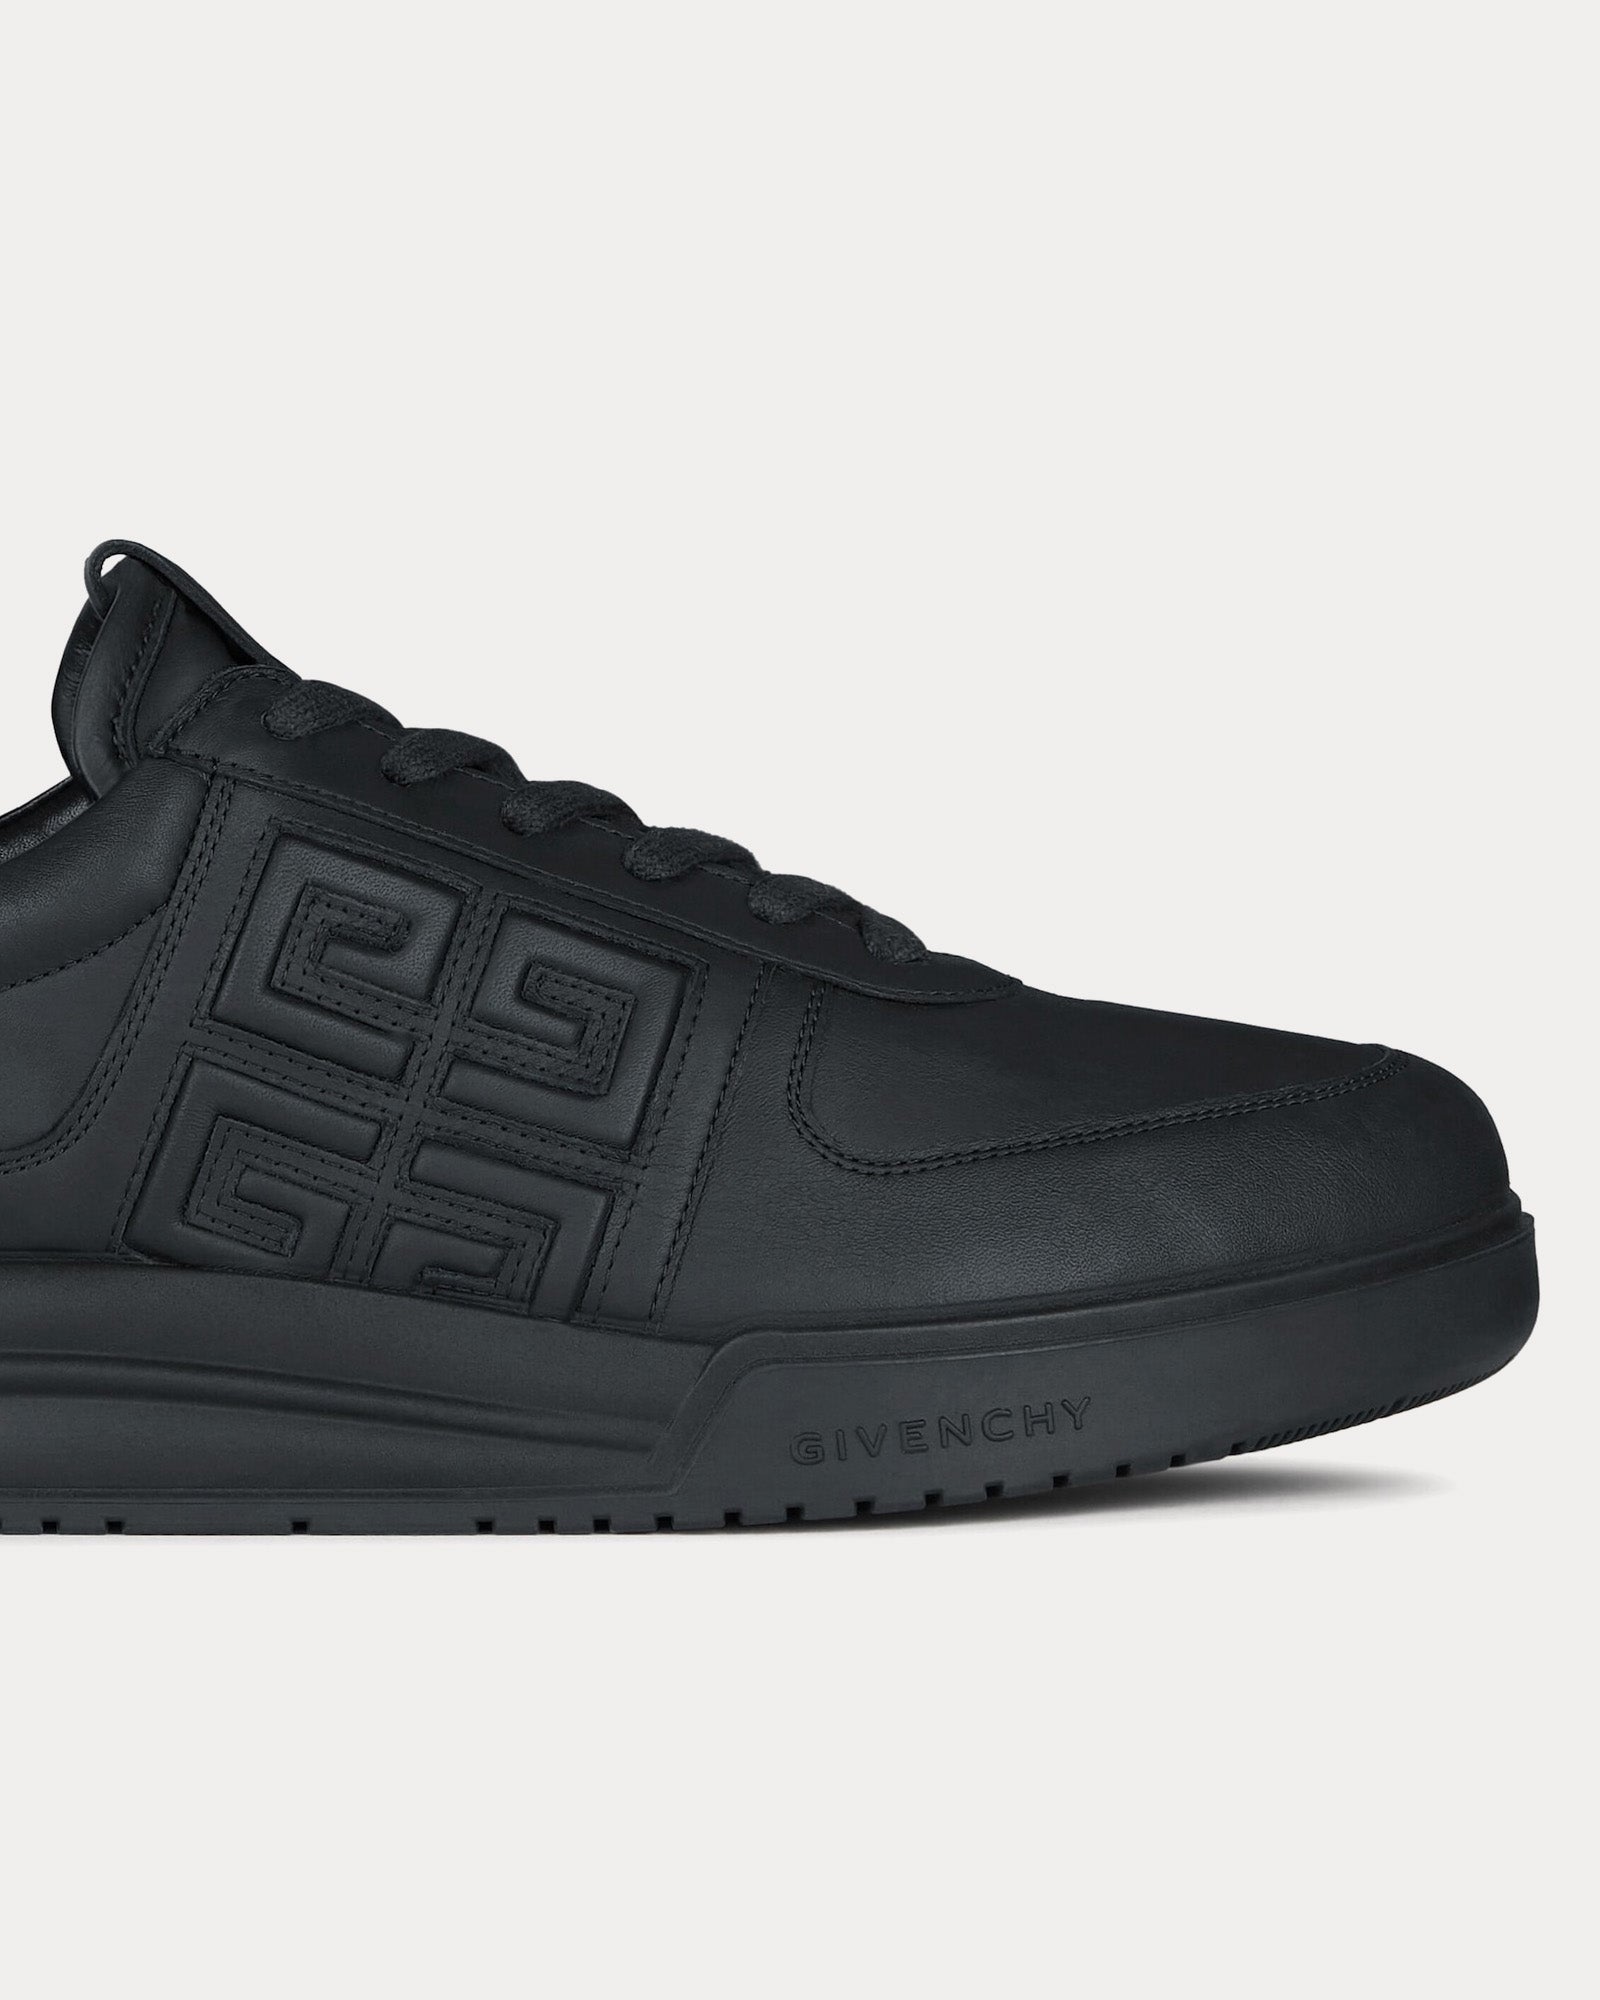 Givenchy - G4 Leather Black Low Top Sneakers